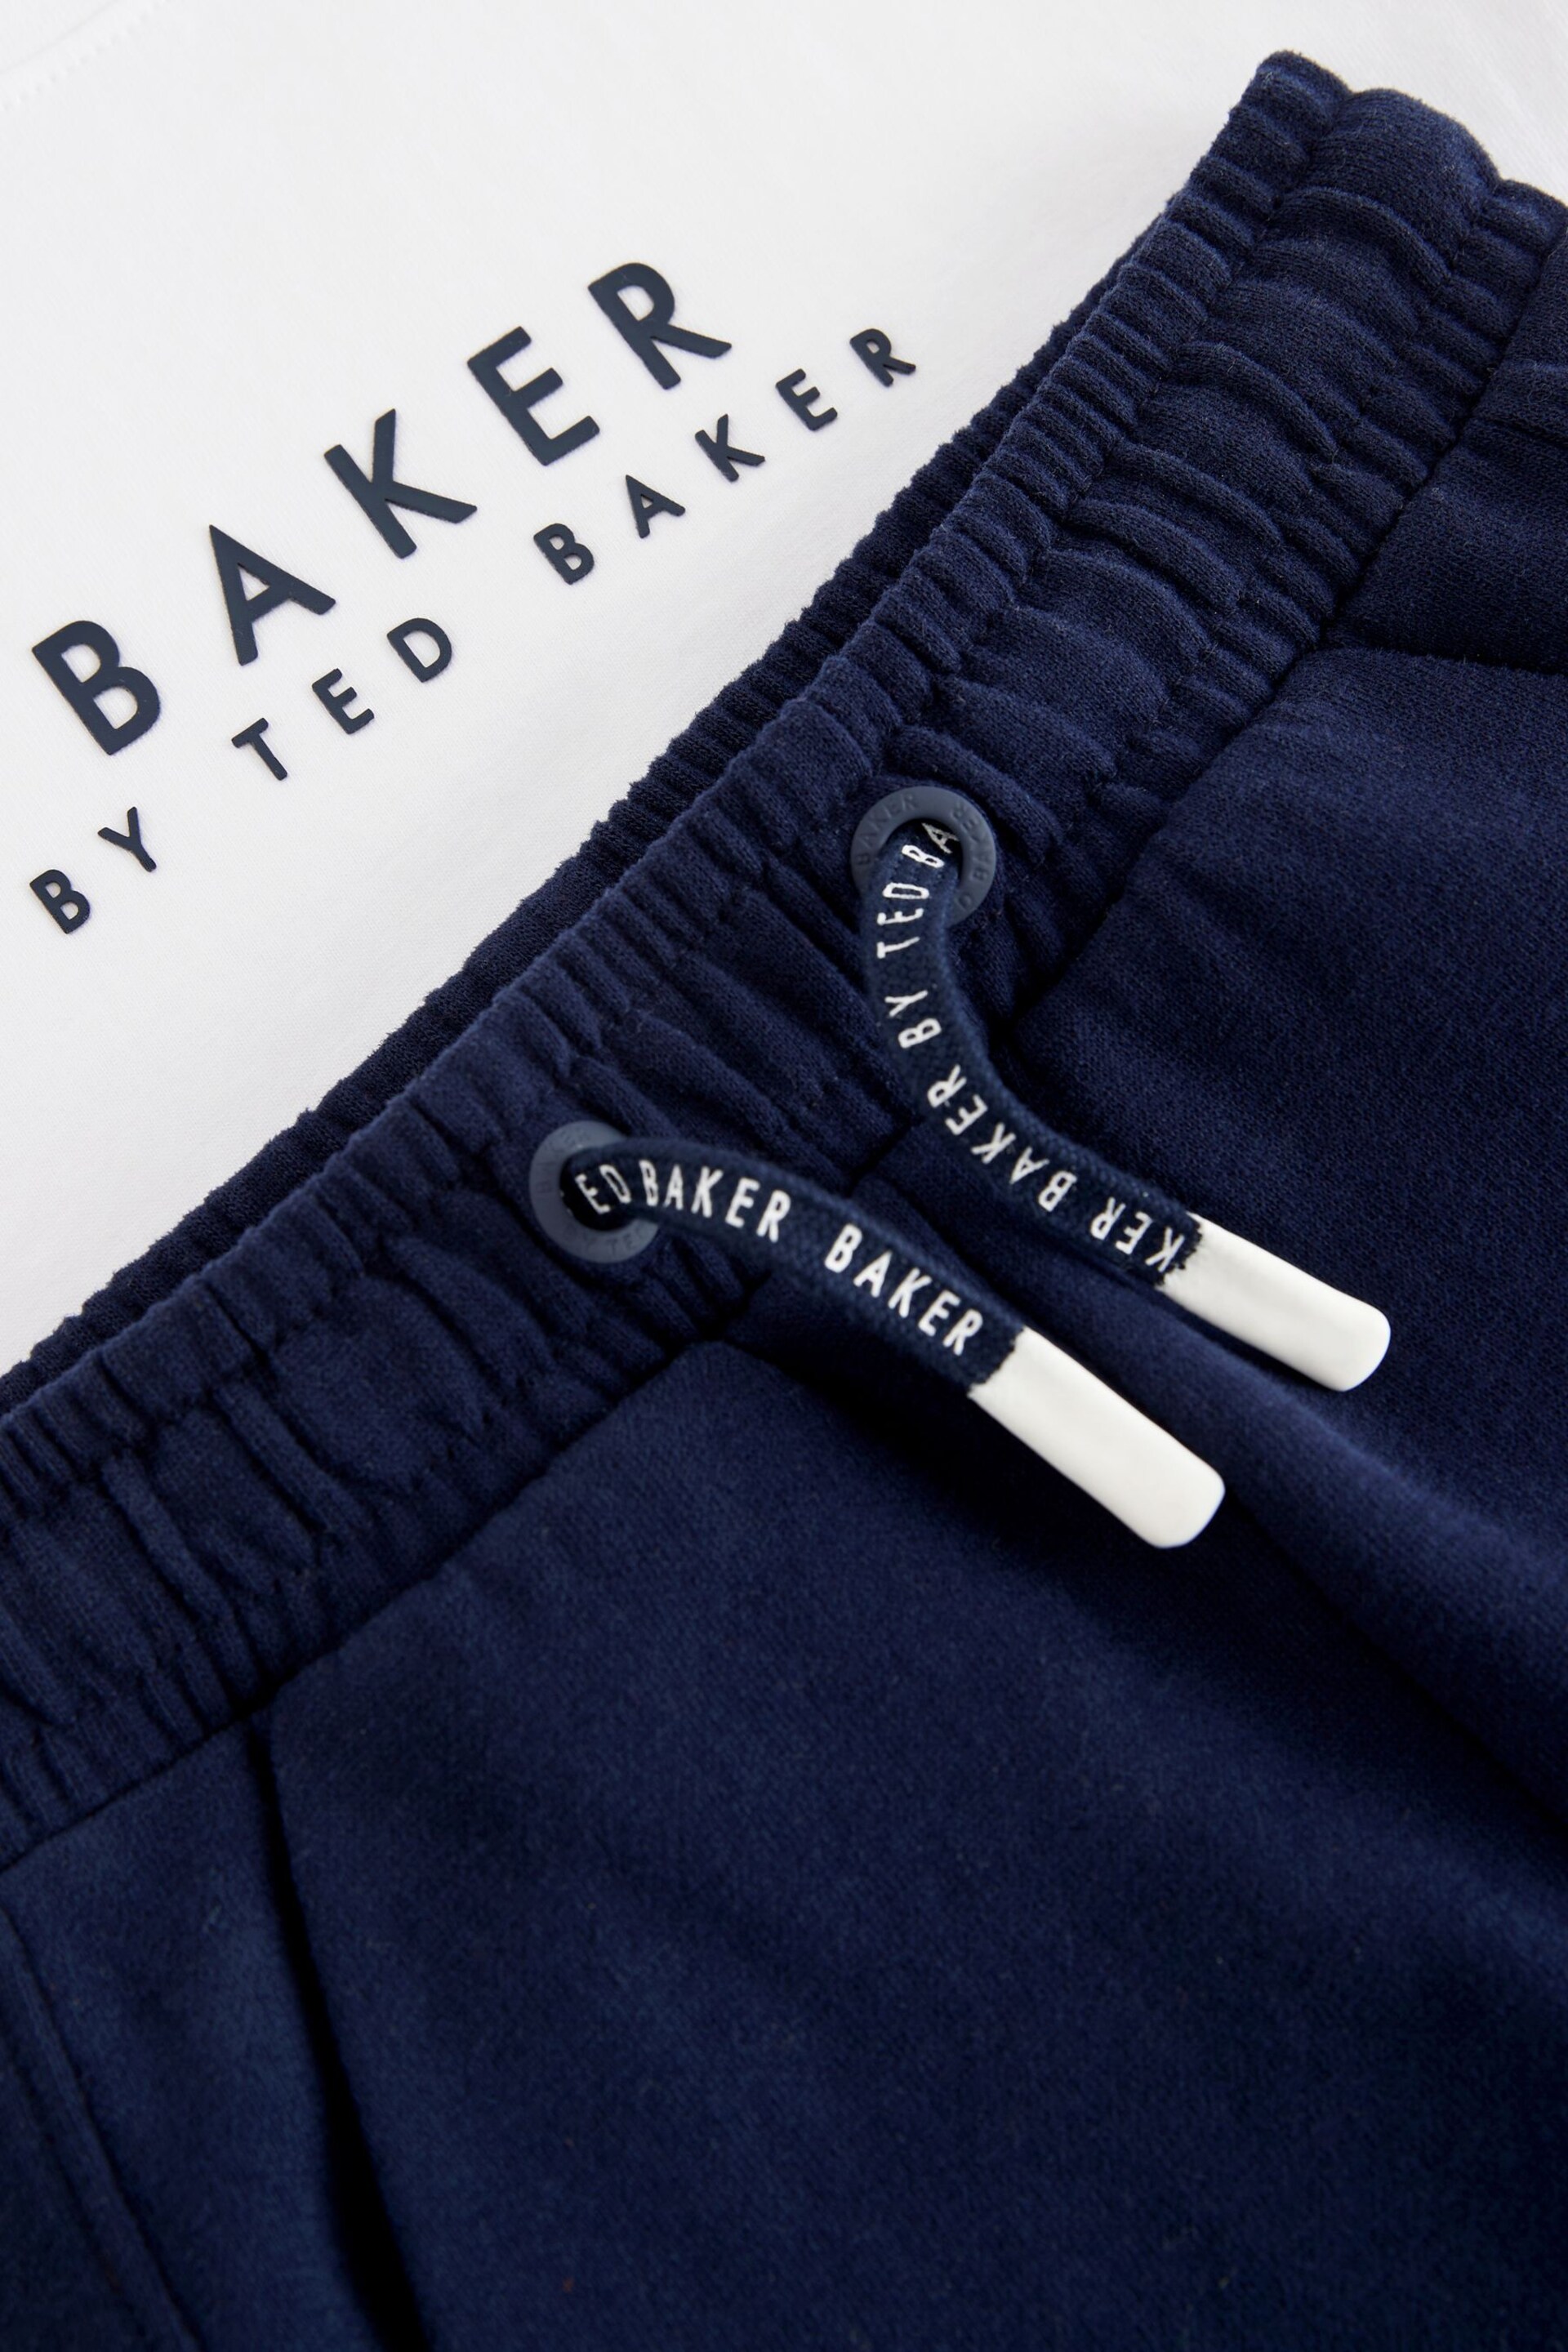 Baker by Ted Baker T-Shirt and Shorts Set - Image 6 of 7